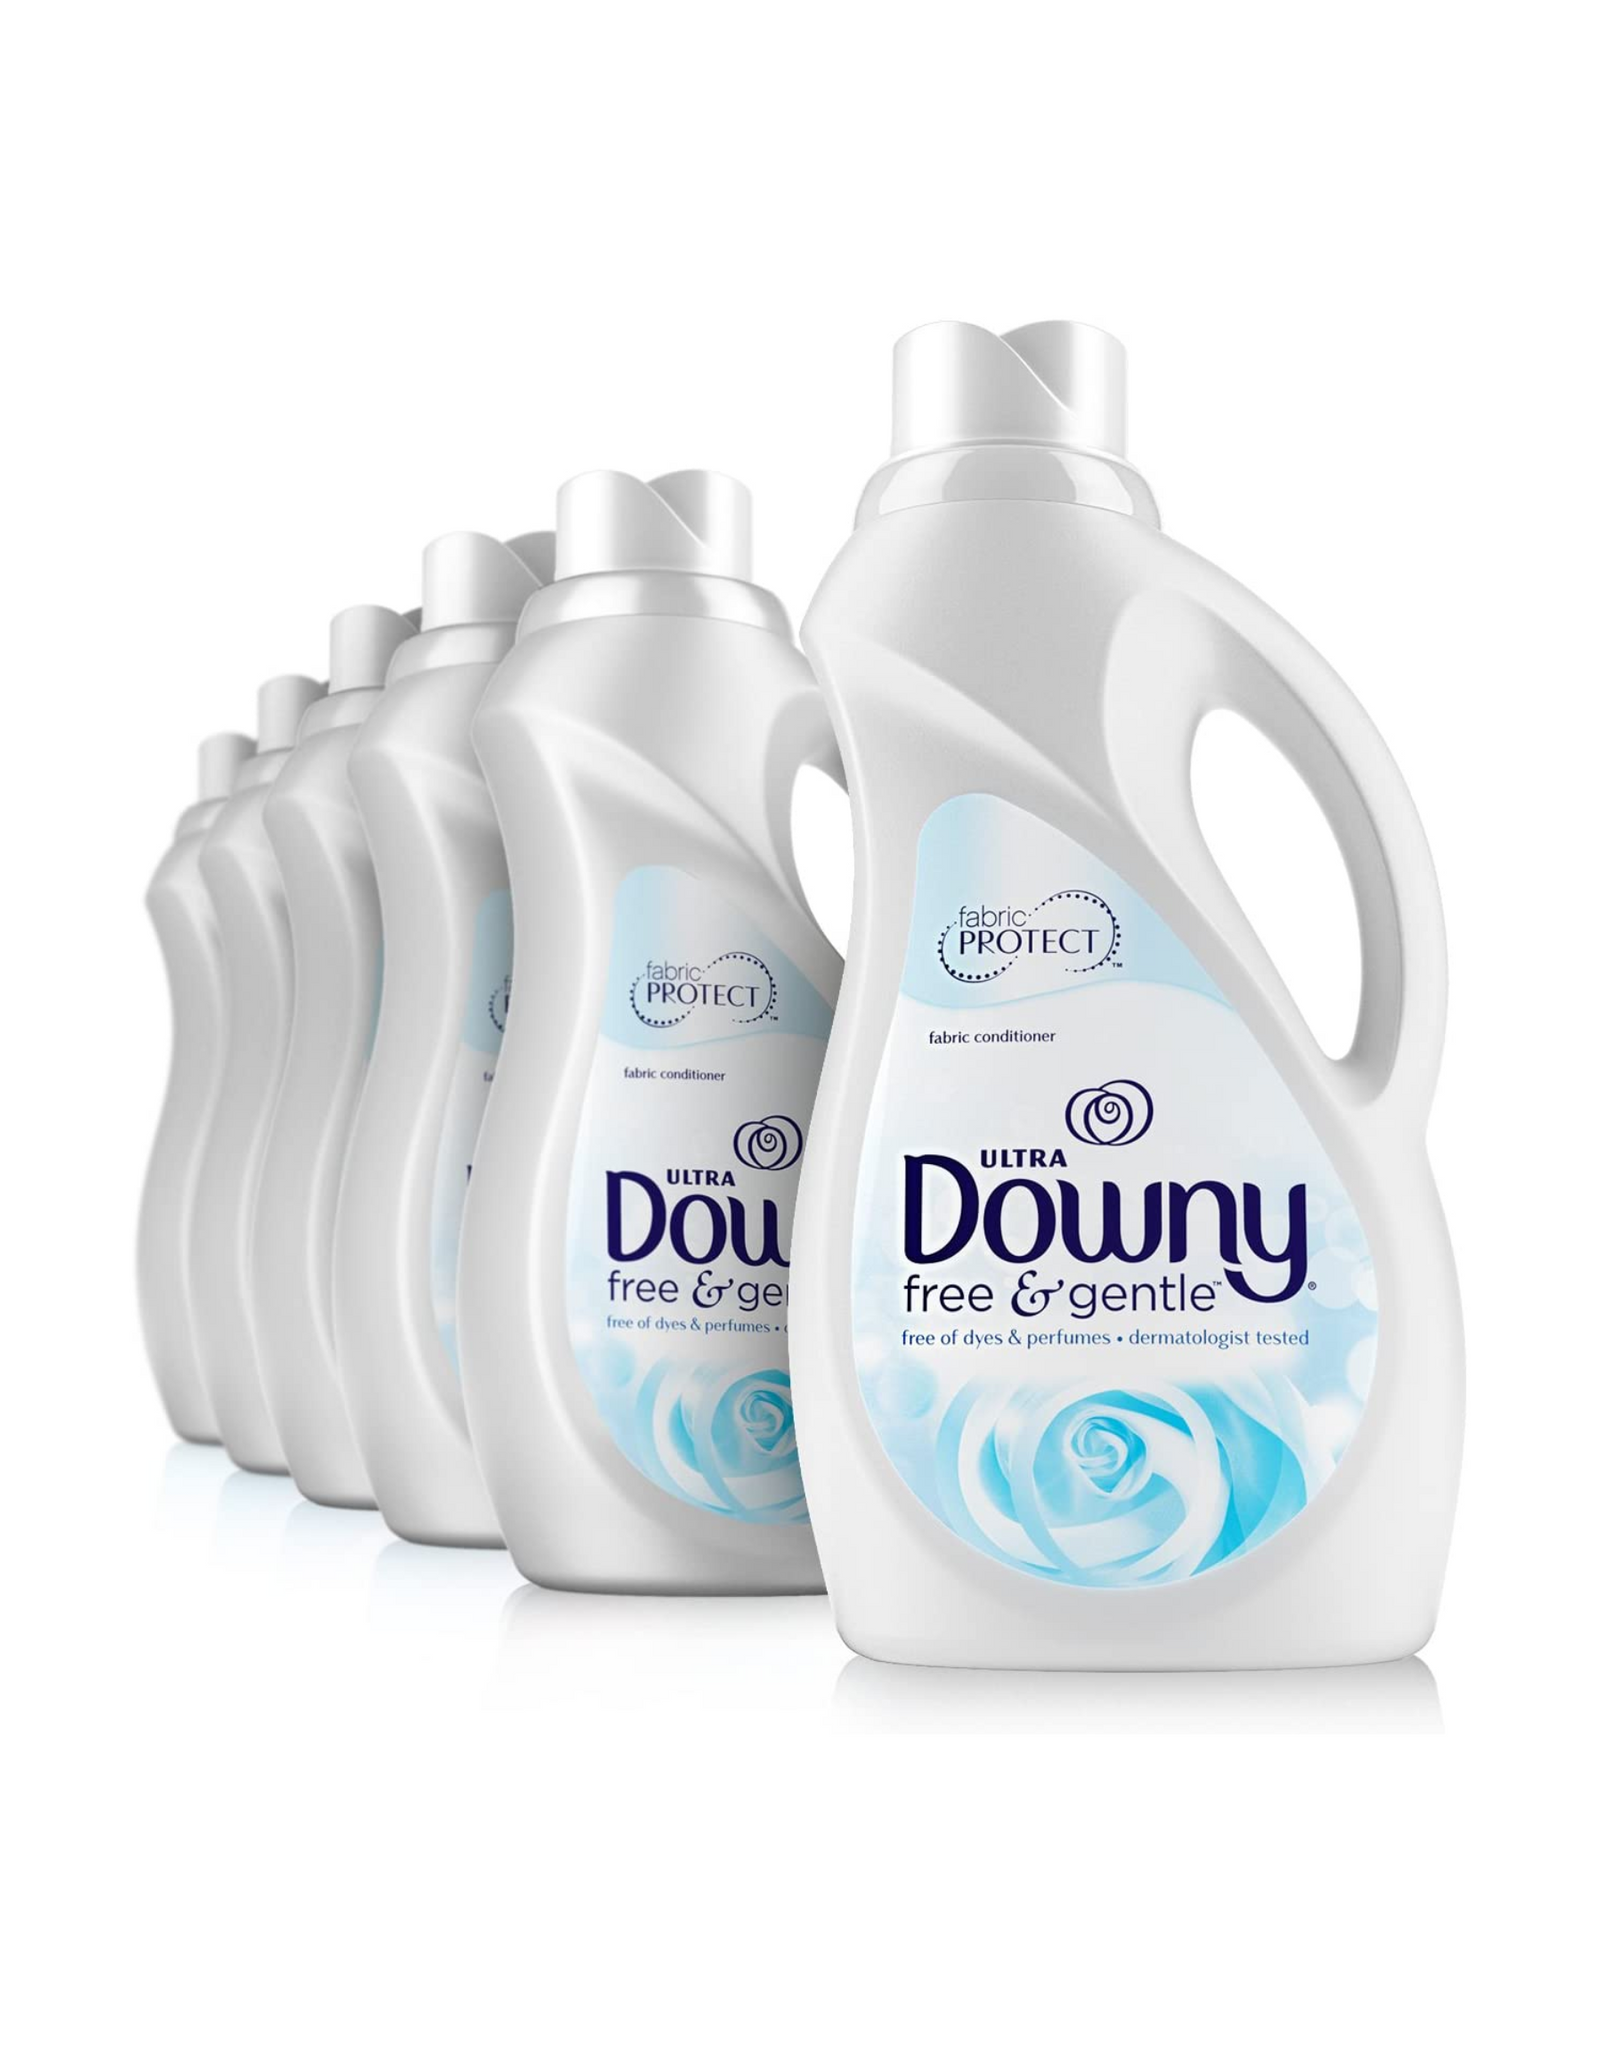 Downy Ultra Free & Gentle Liquid Fabric Conditioner (Fabric Softener), 34 Oz Bottles, 240 Loads Total (6 Pack)